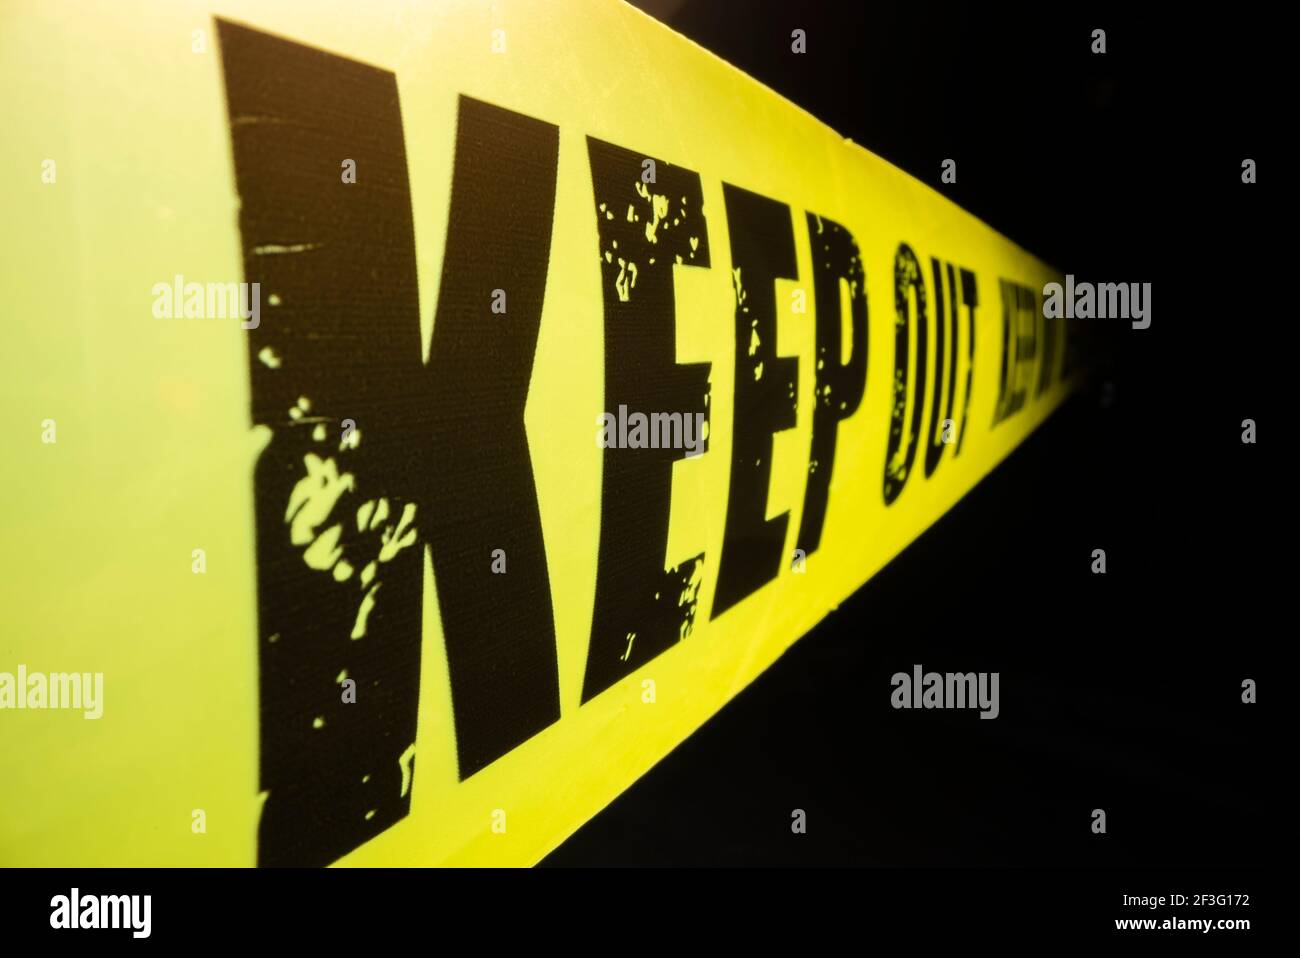 Close-up view of keep out tape against dark background Stock Photo